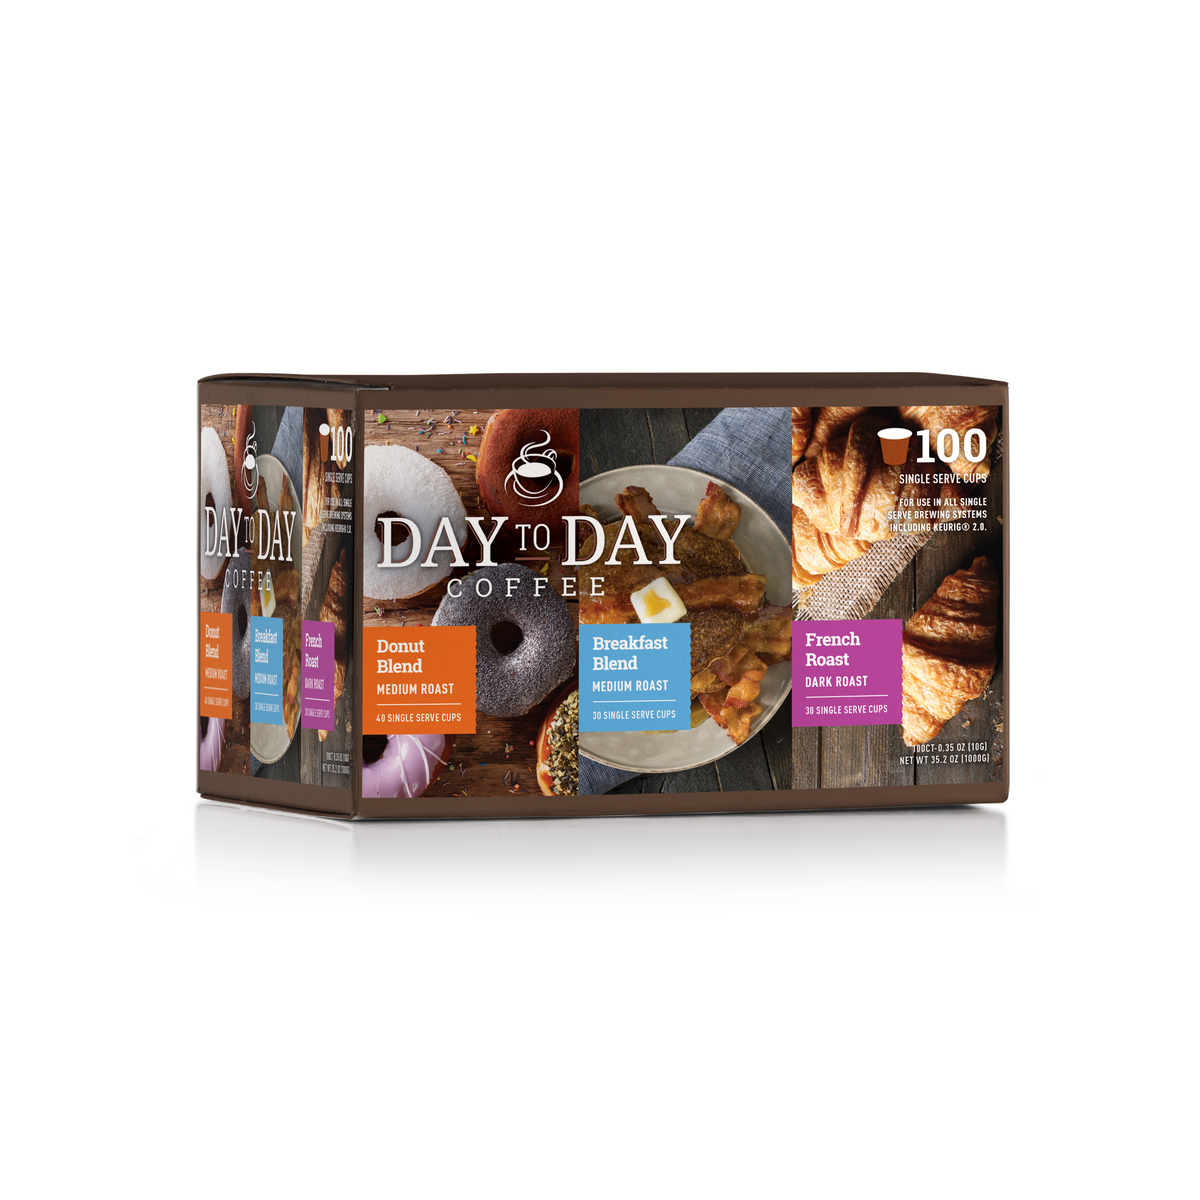 Day to day coffee 100 count variety regular pack coffee pods for single serve coffee brewer